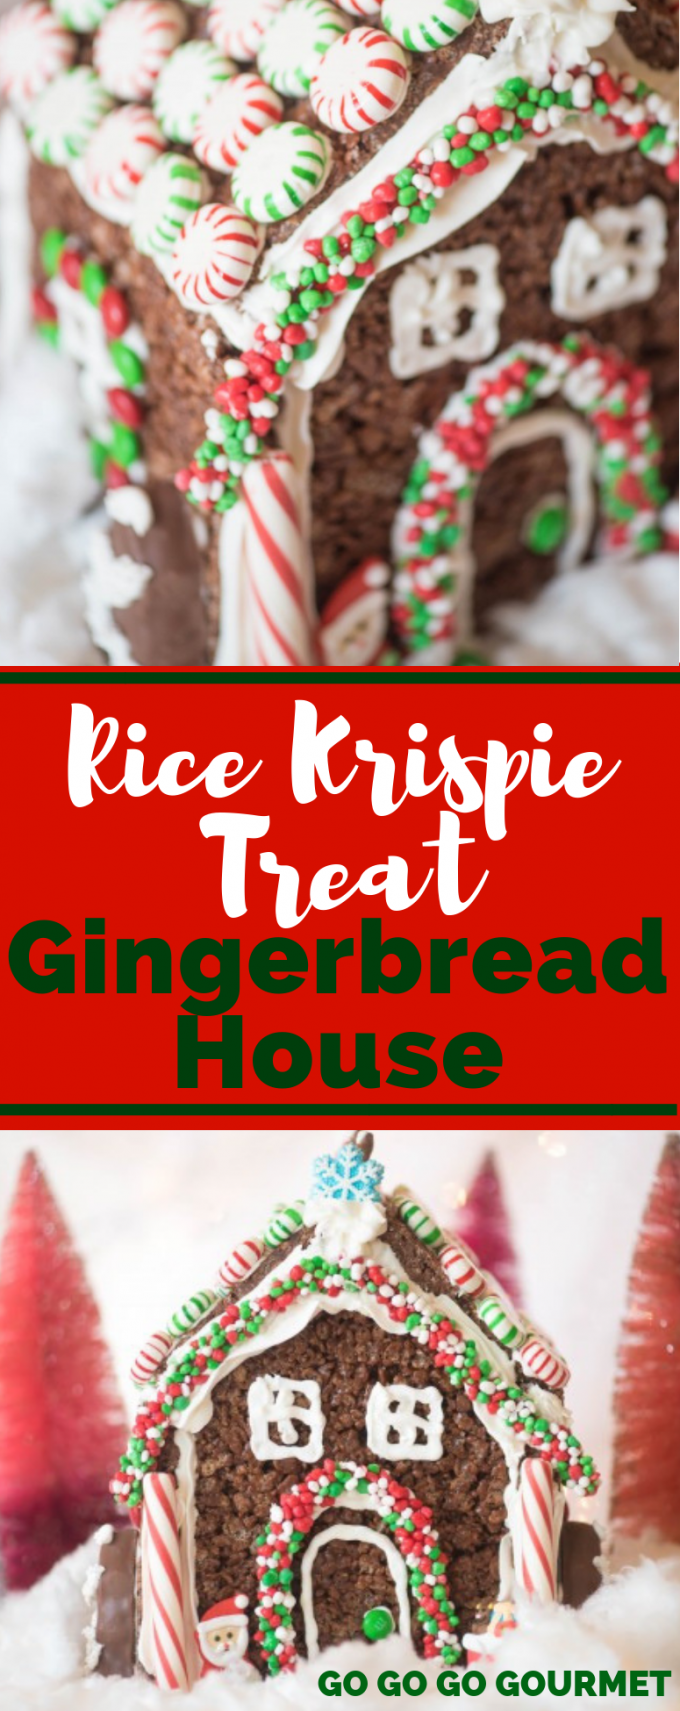 If you're wondering how to make a gingerbread house, this may be one of the easiest ideas ever for building a gingerbread house from scratch! No bake, easy recipe and virtually no fuss- makes decorating for kids easy! The perfect Rice Krispie Treats for Christmas. #gogogogourmet #ricekrispietreatgingerbreadhouse #gingerbreadhouserecipe #christmasrecipes via @gogogogourmet